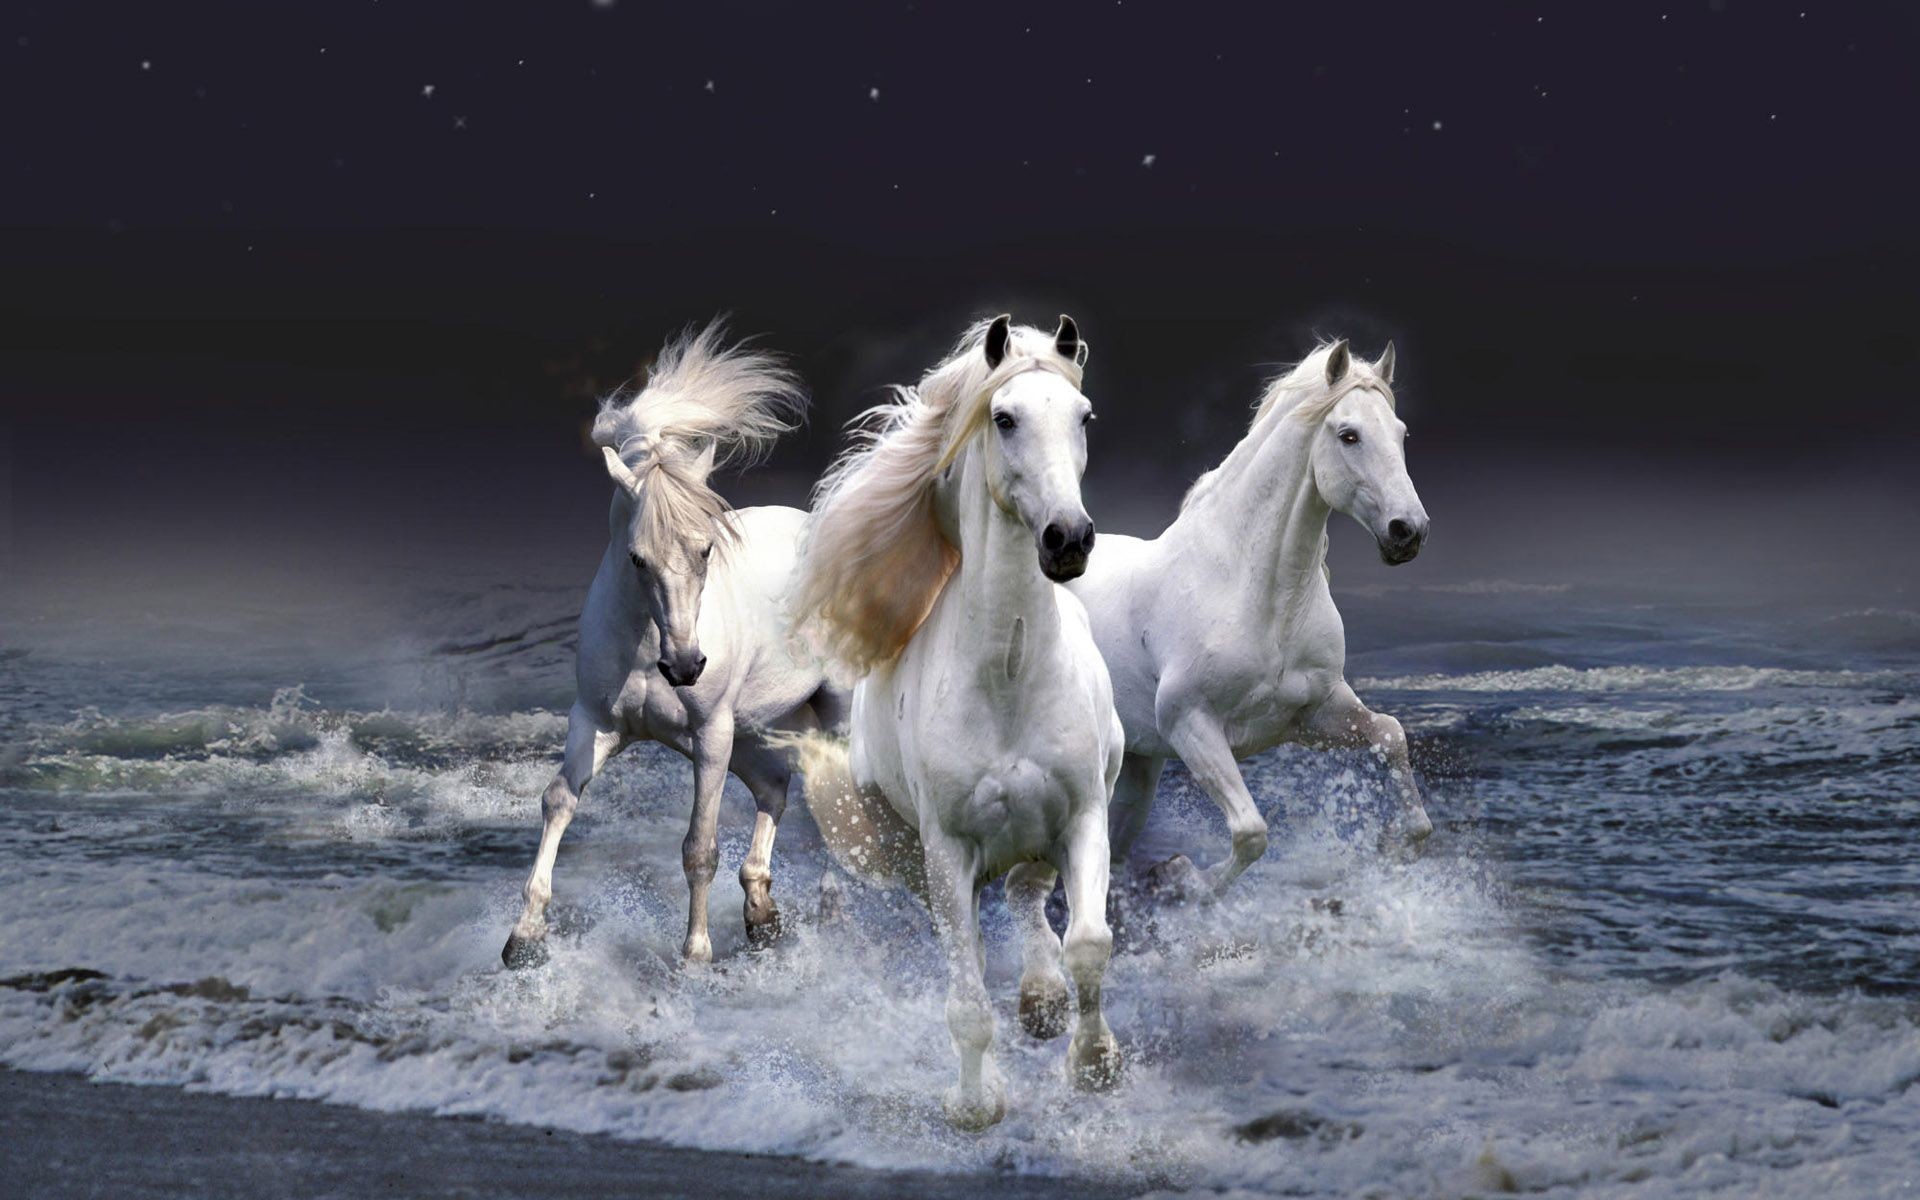 1920x1200 Wild Horses And The Sea Wallpaper | HD Animals and Birds Wallpaper Free  Download ...